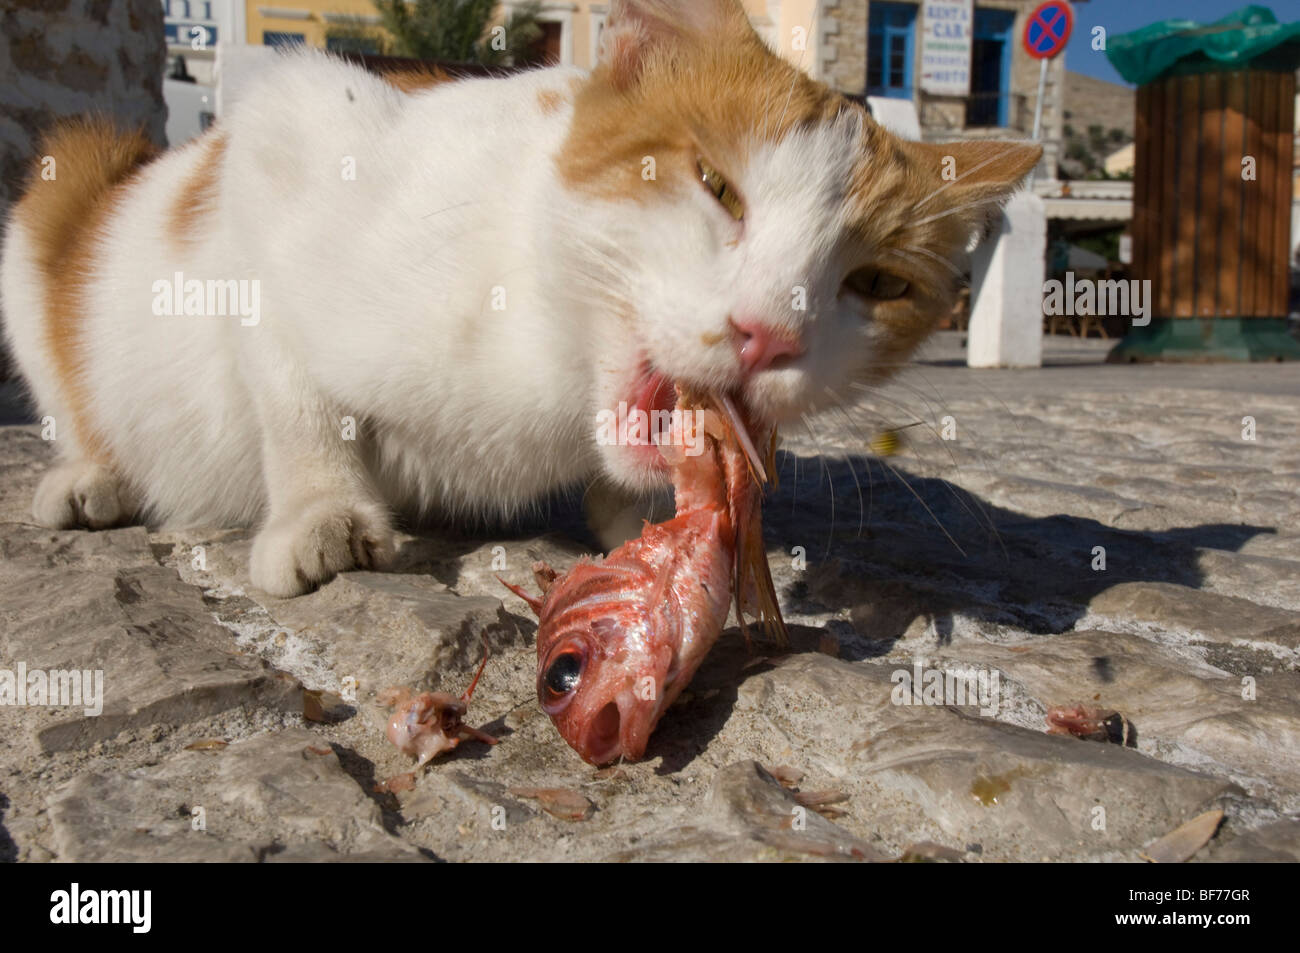 A stray cat crunching a fish it has scavanged on the harbourside of a Greek island Stock Photo